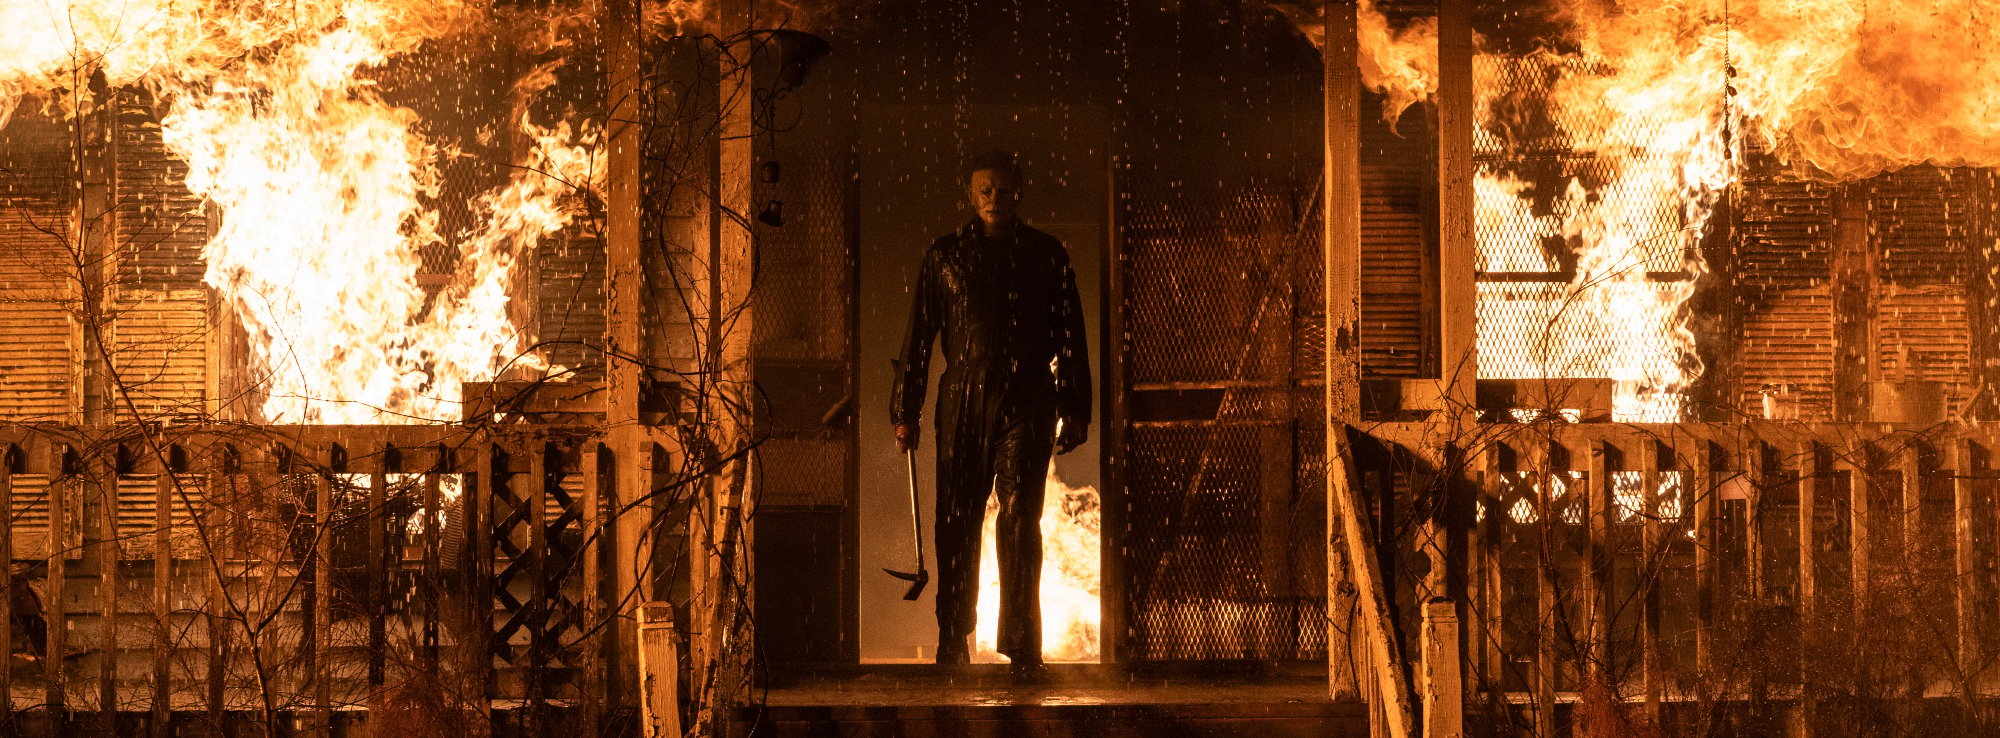 'Halloween Kills' horror slasher Michael Myers escaping from a house on fire with a weapon